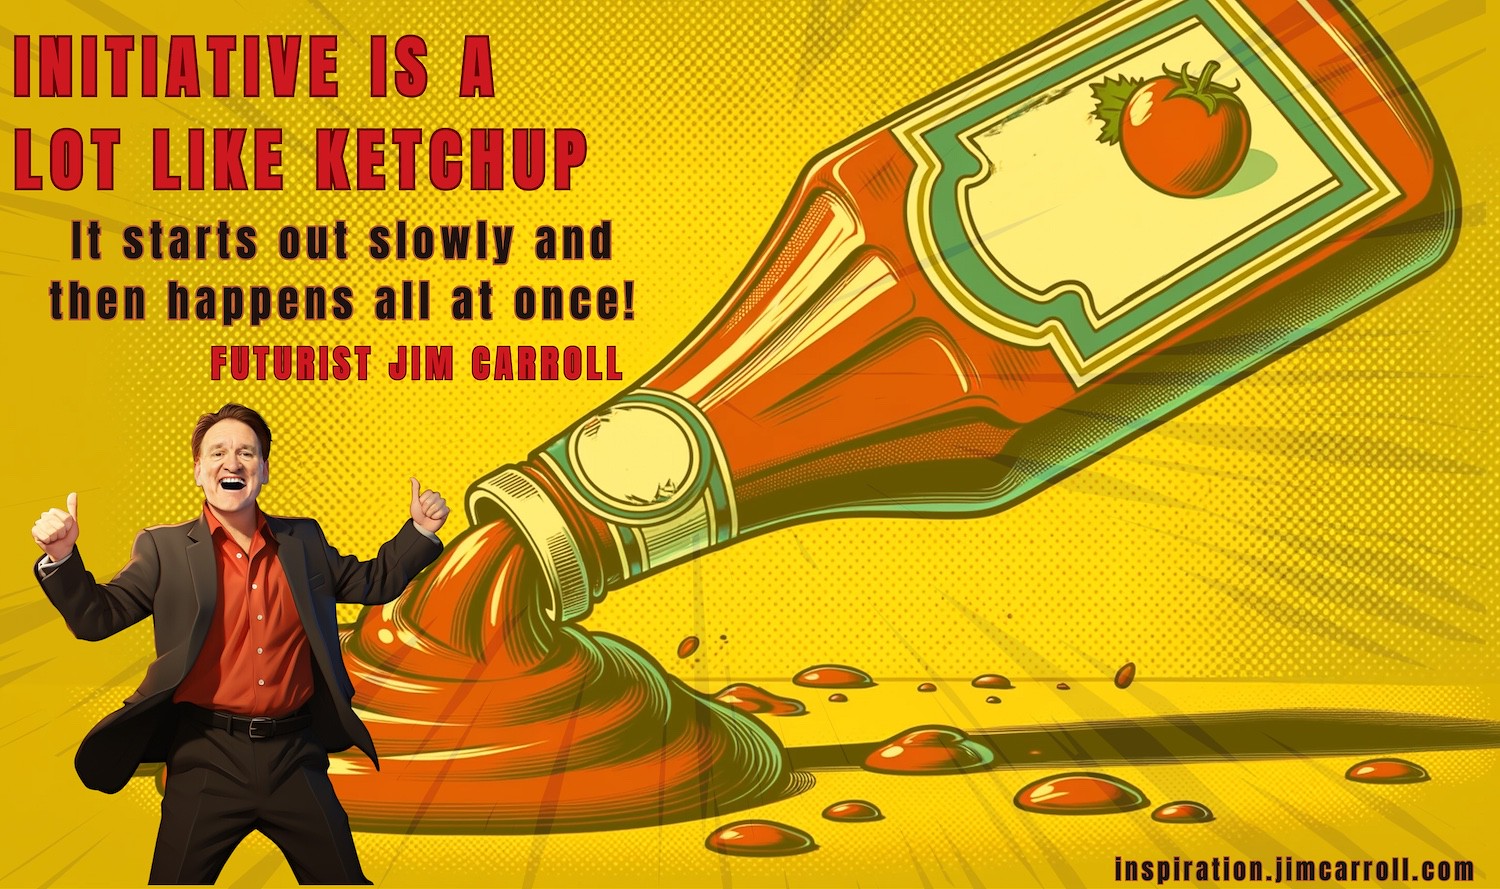 "Initiative is a lot like ketchup - it starts out slowly and then happens all at once!" - Futurist Jim Carroll